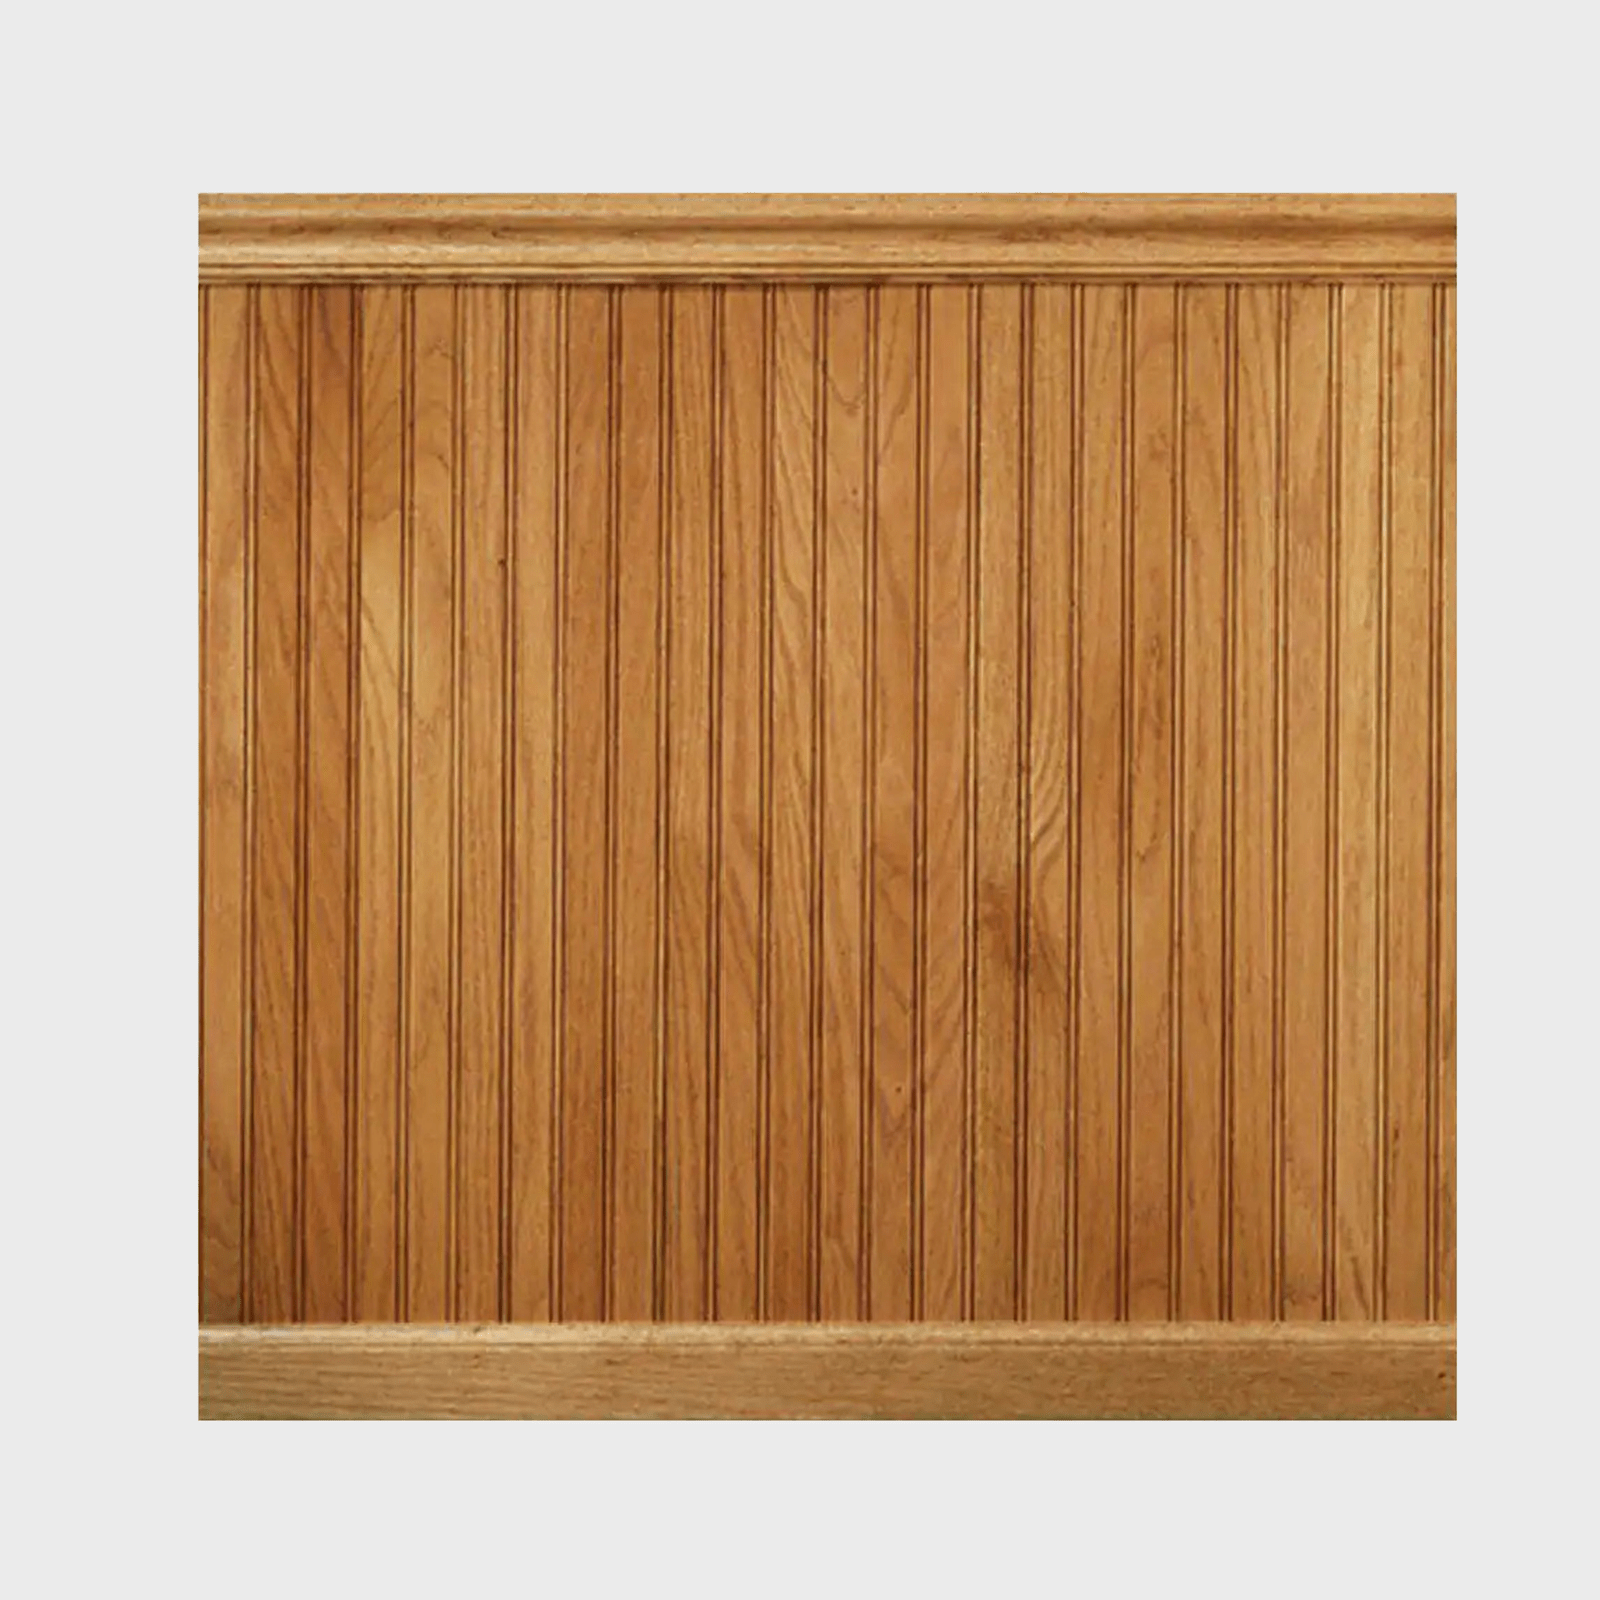 1/8 in. x 48 in. x 96 in. Canyon Yew Wall Panel